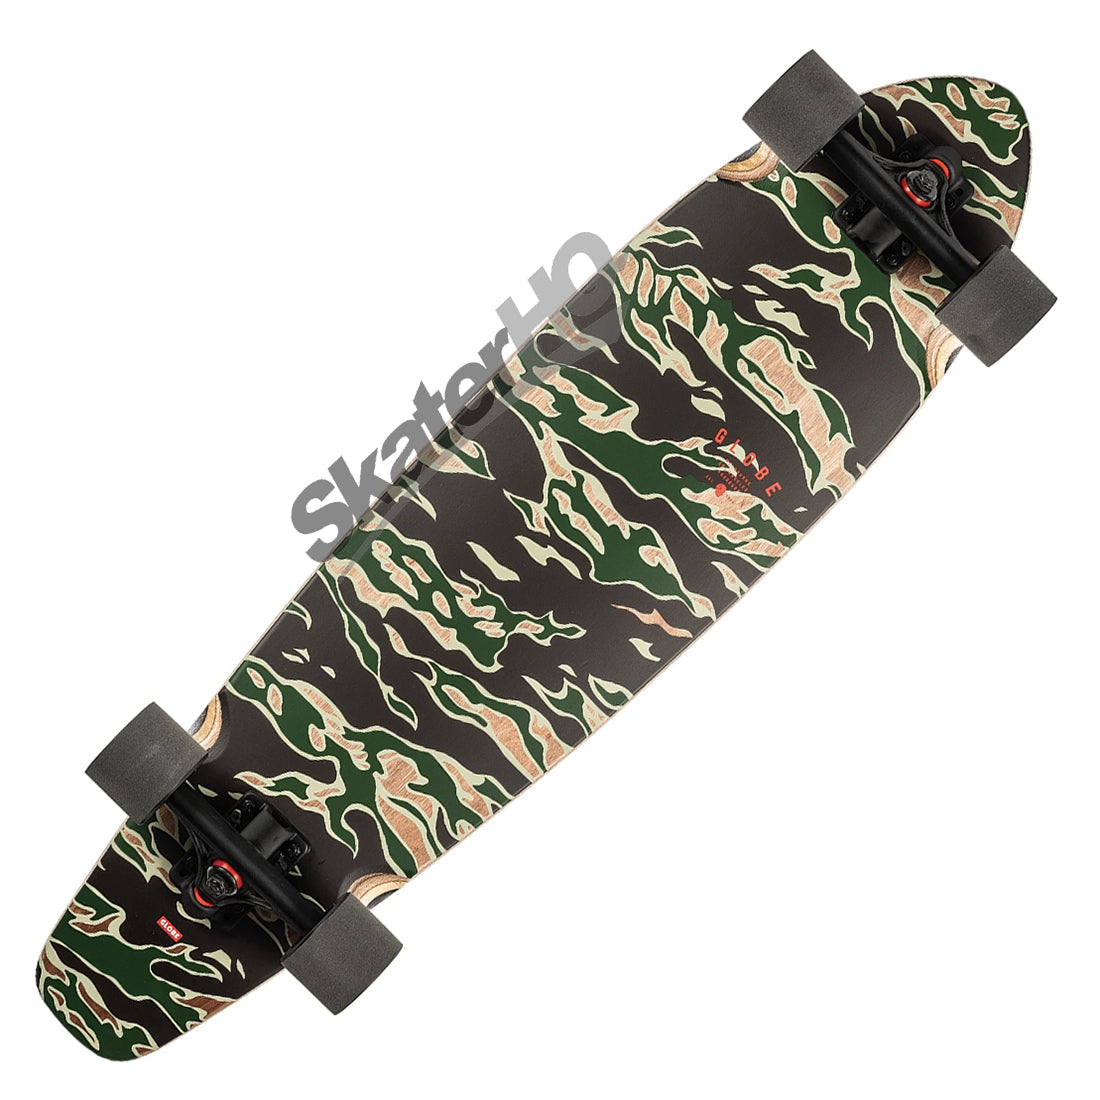 Globe The All-Time 35 Complete - Tiger-Camo Skateboard Completes Longboards